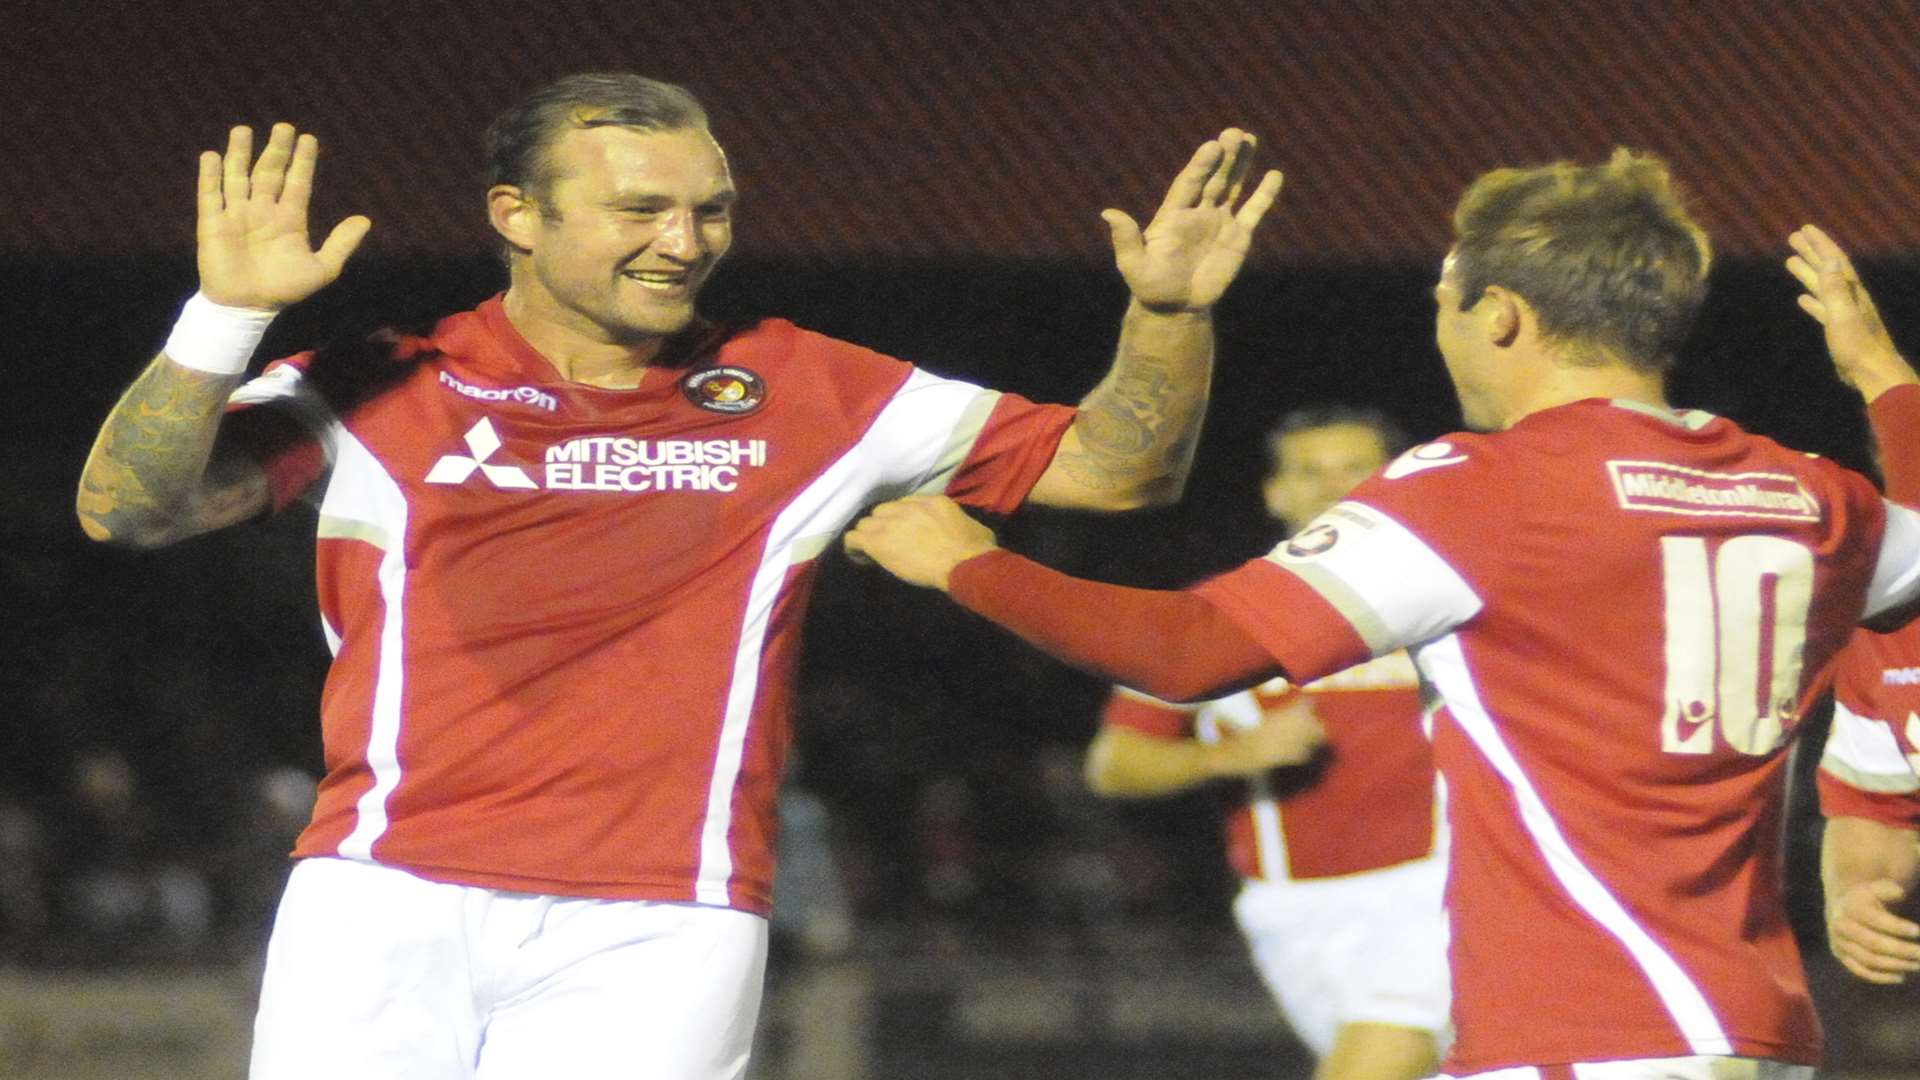 Danny Kedwell's goal at Whitehawk was his 13th of the season Picture: Steve Crispe